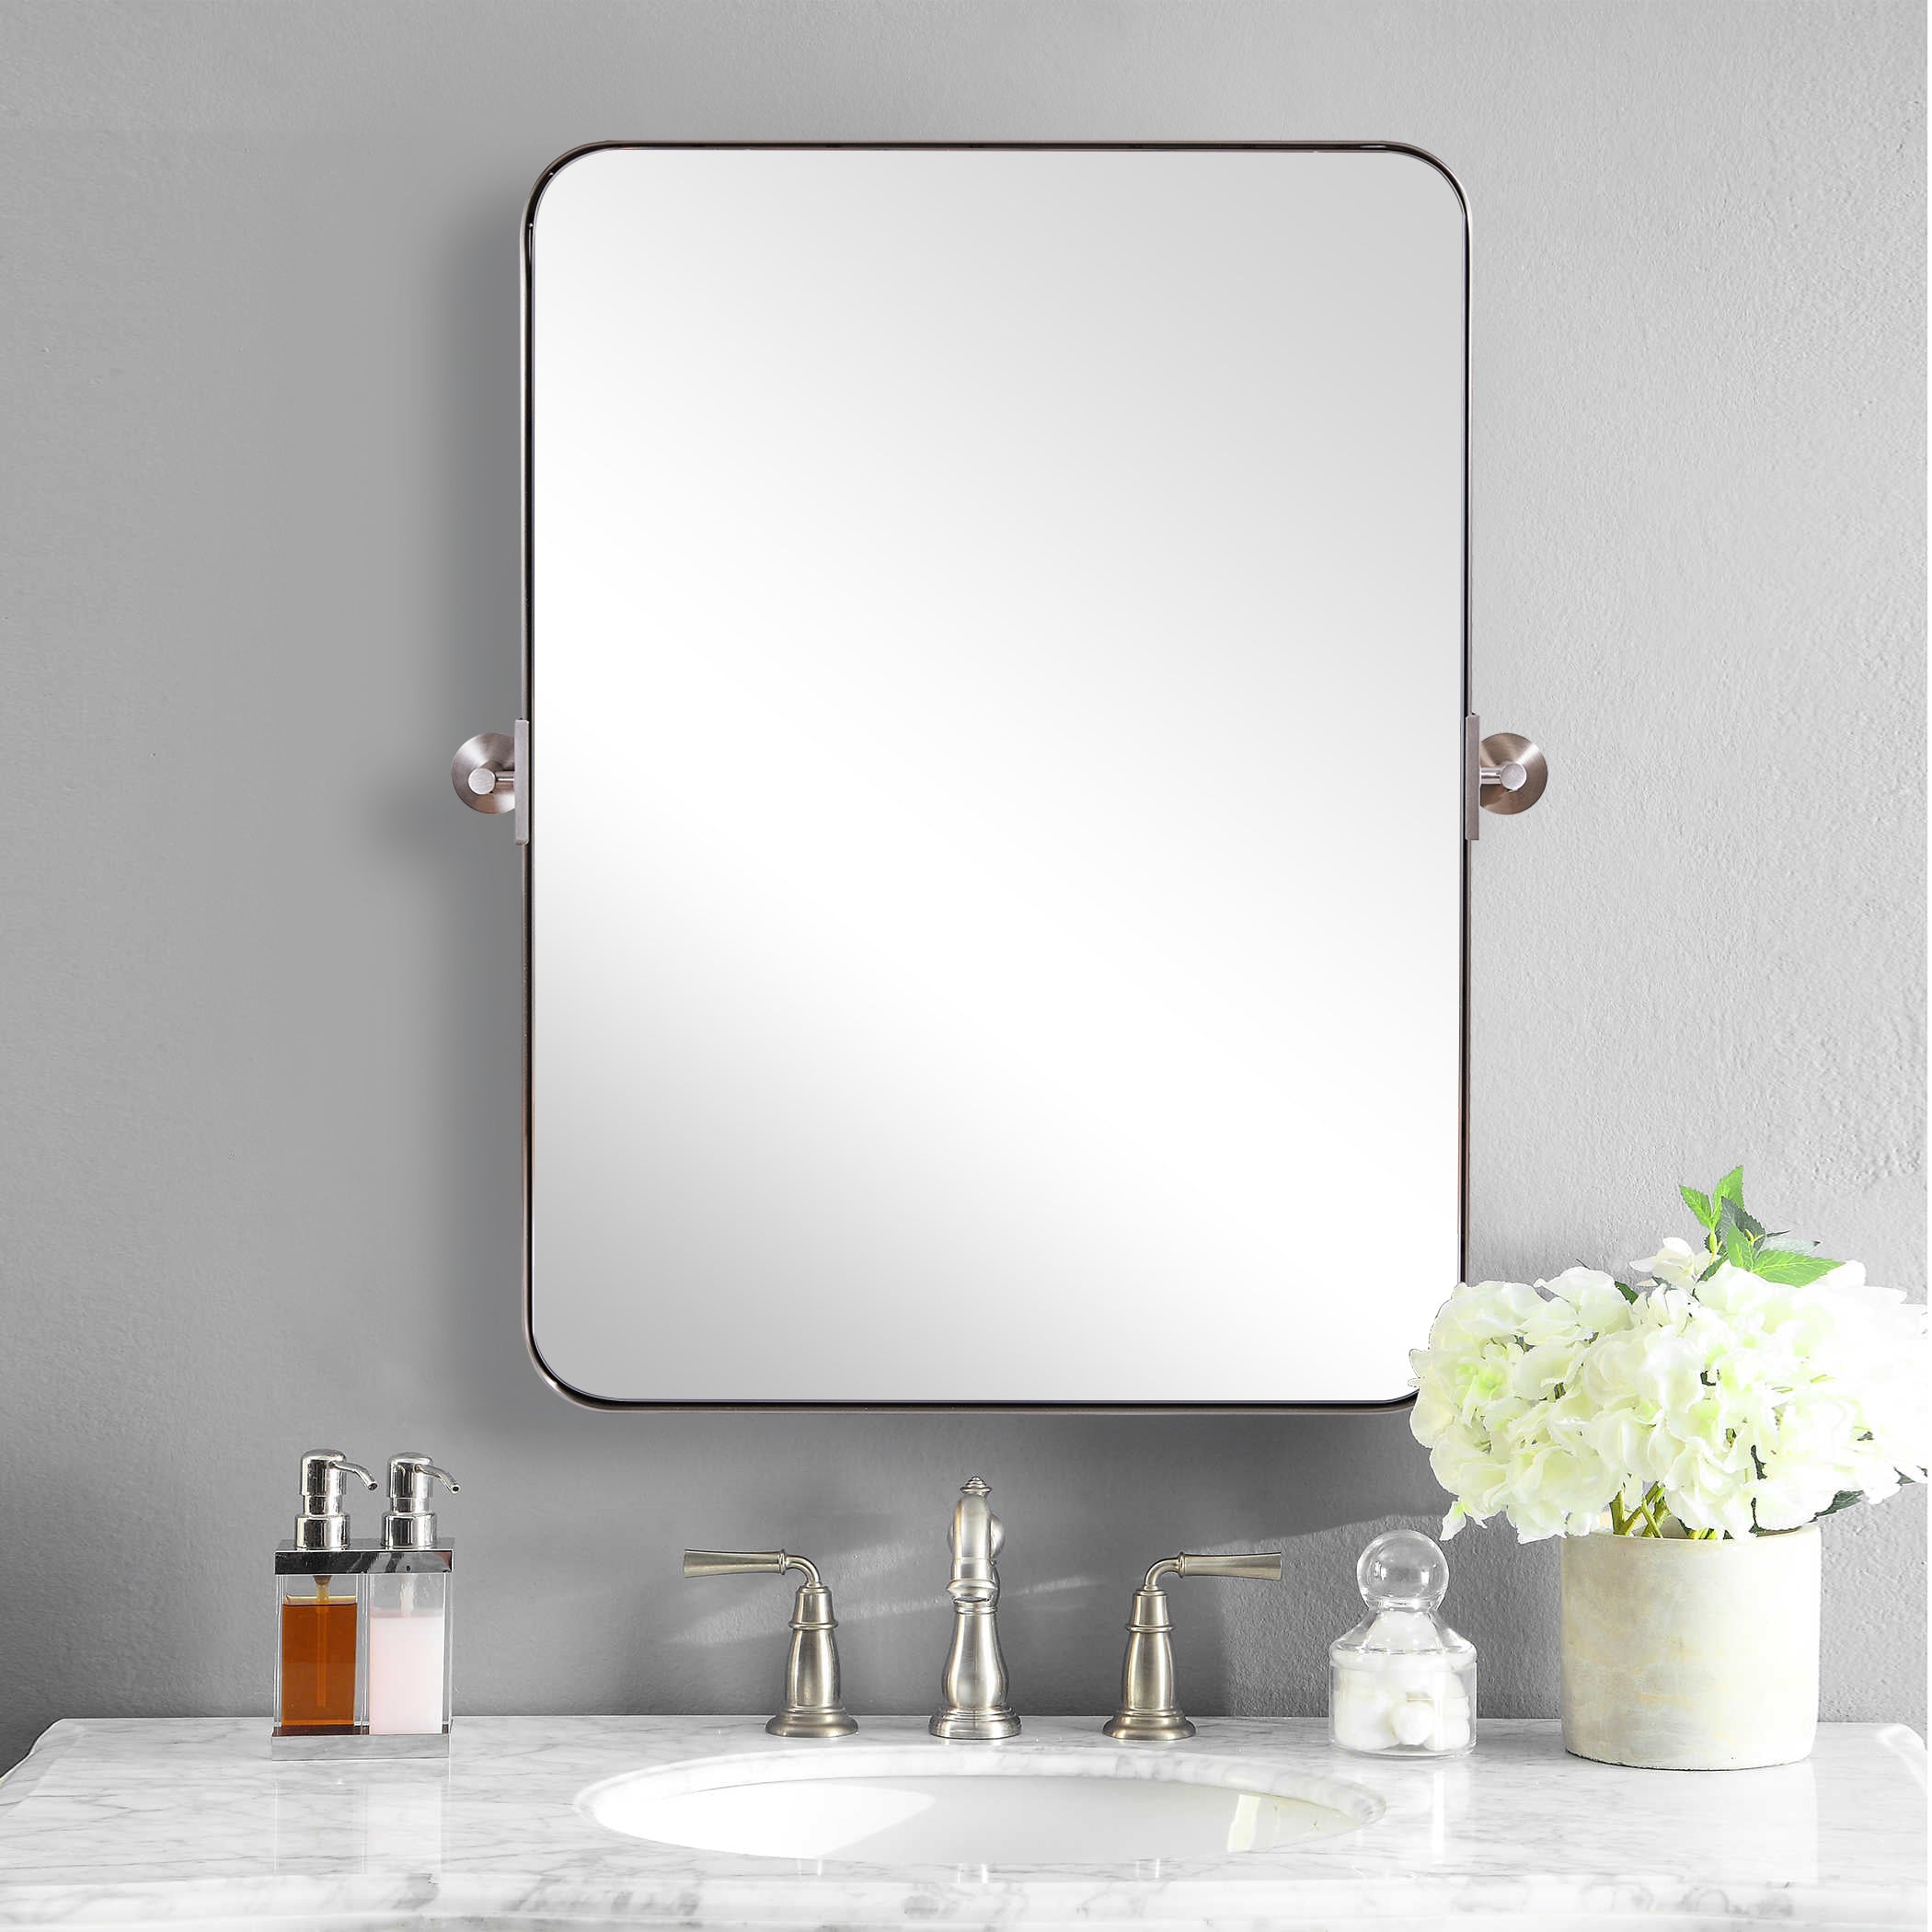 Modern Tilting Pivot Mirror for Bathroom Vanity Rounded Rectangle Mirror Adjustable Swivel Wall Mirror| Stainless Steel Frame Mounted Vertically